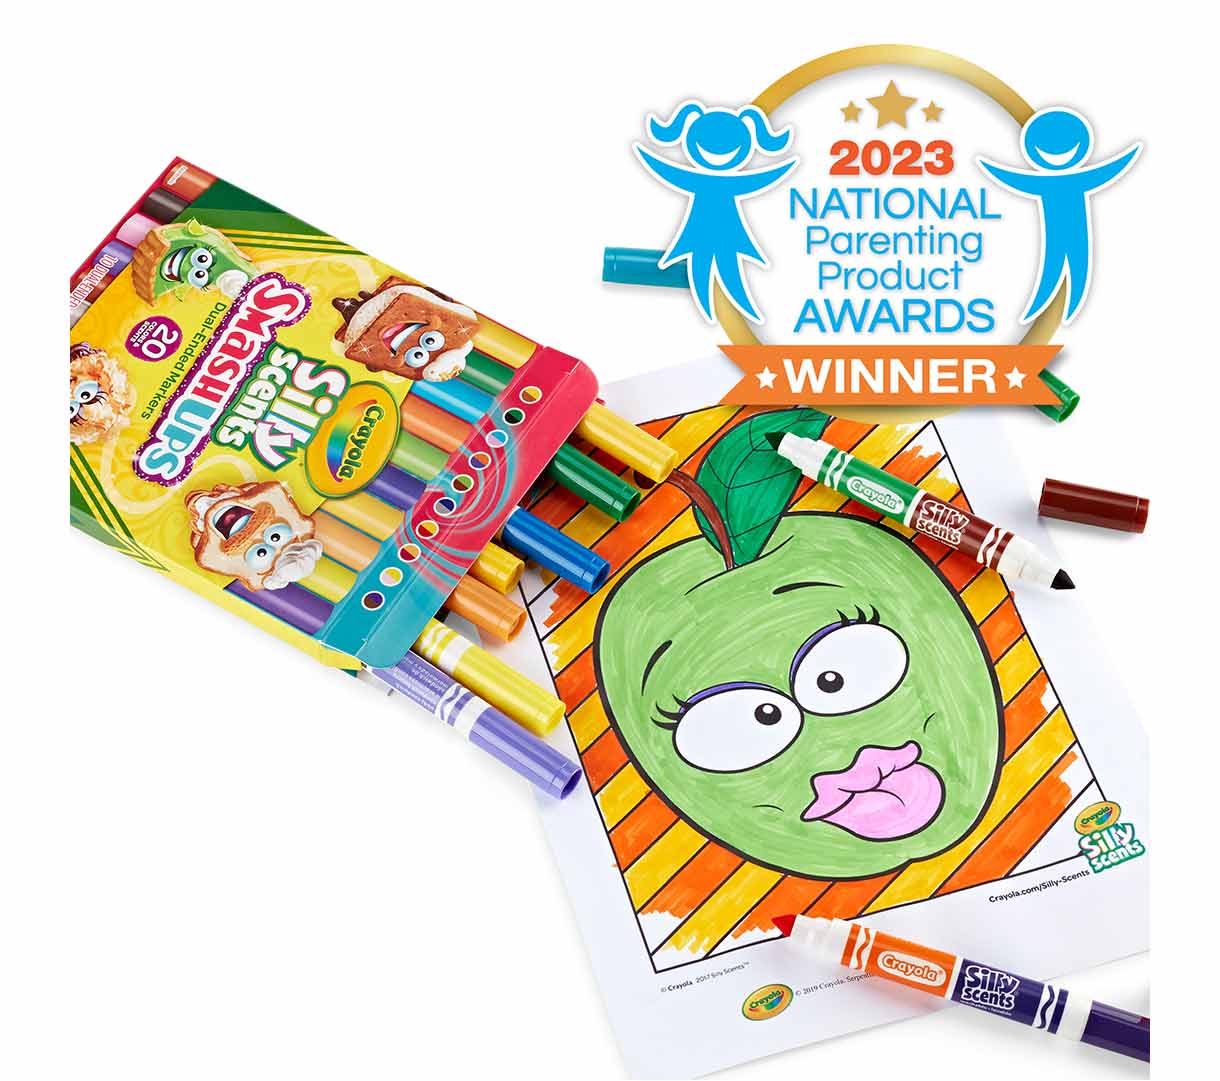 Crayola Dual-Ended Silly Scented Washable Markers